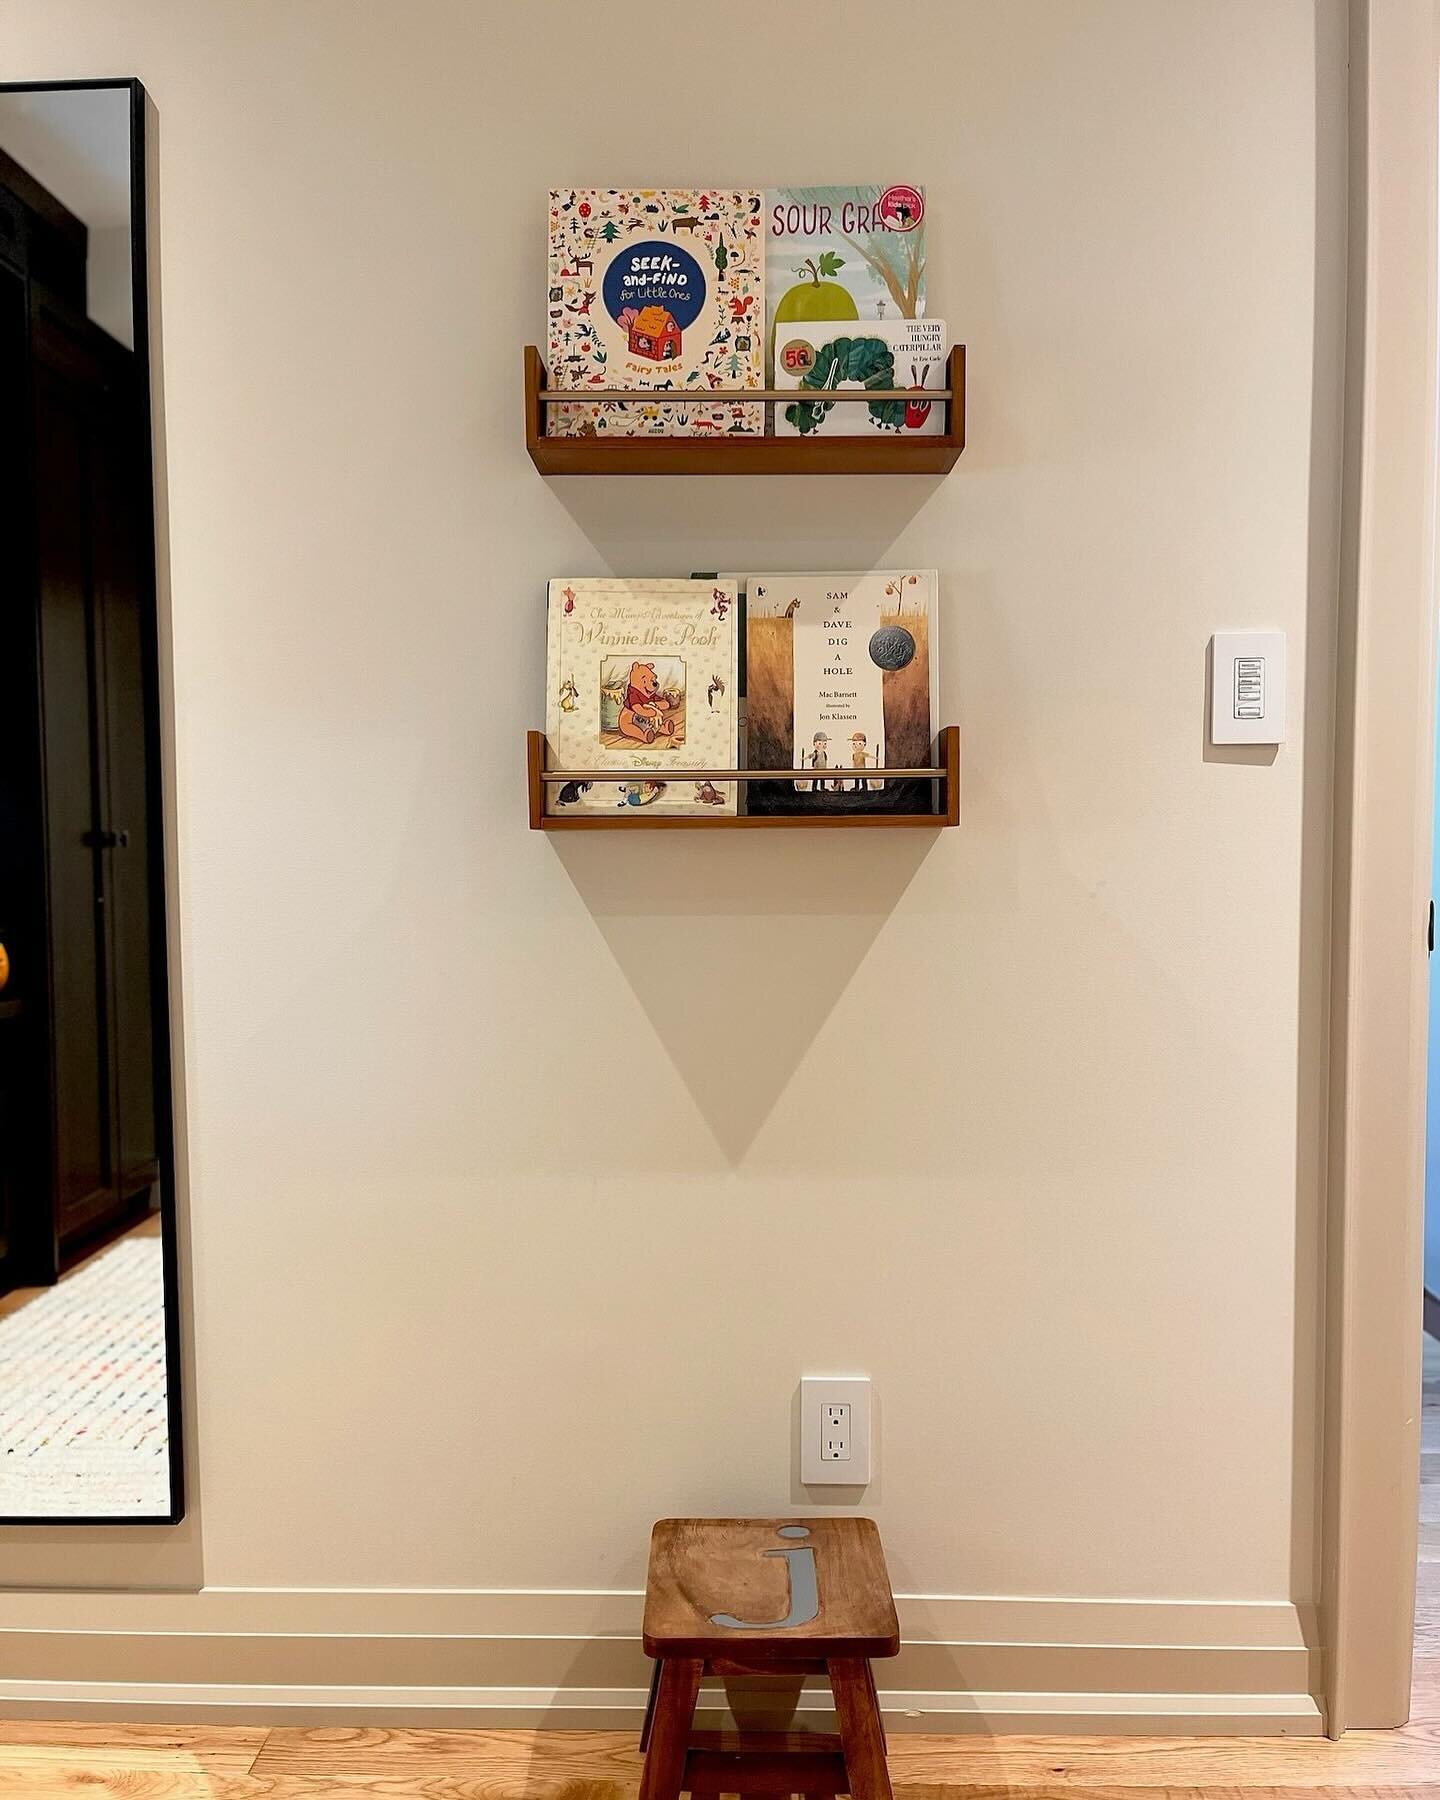 Hack of the day! Turned these West Elm spice wall racks into wall bookshelves to organized your child's favorite books 📚 
.
.
.
.
.
.
.
.
.
.
.
#interiordesigner #interiordesignideas #homedecor #homestyling #interiordesign #decor